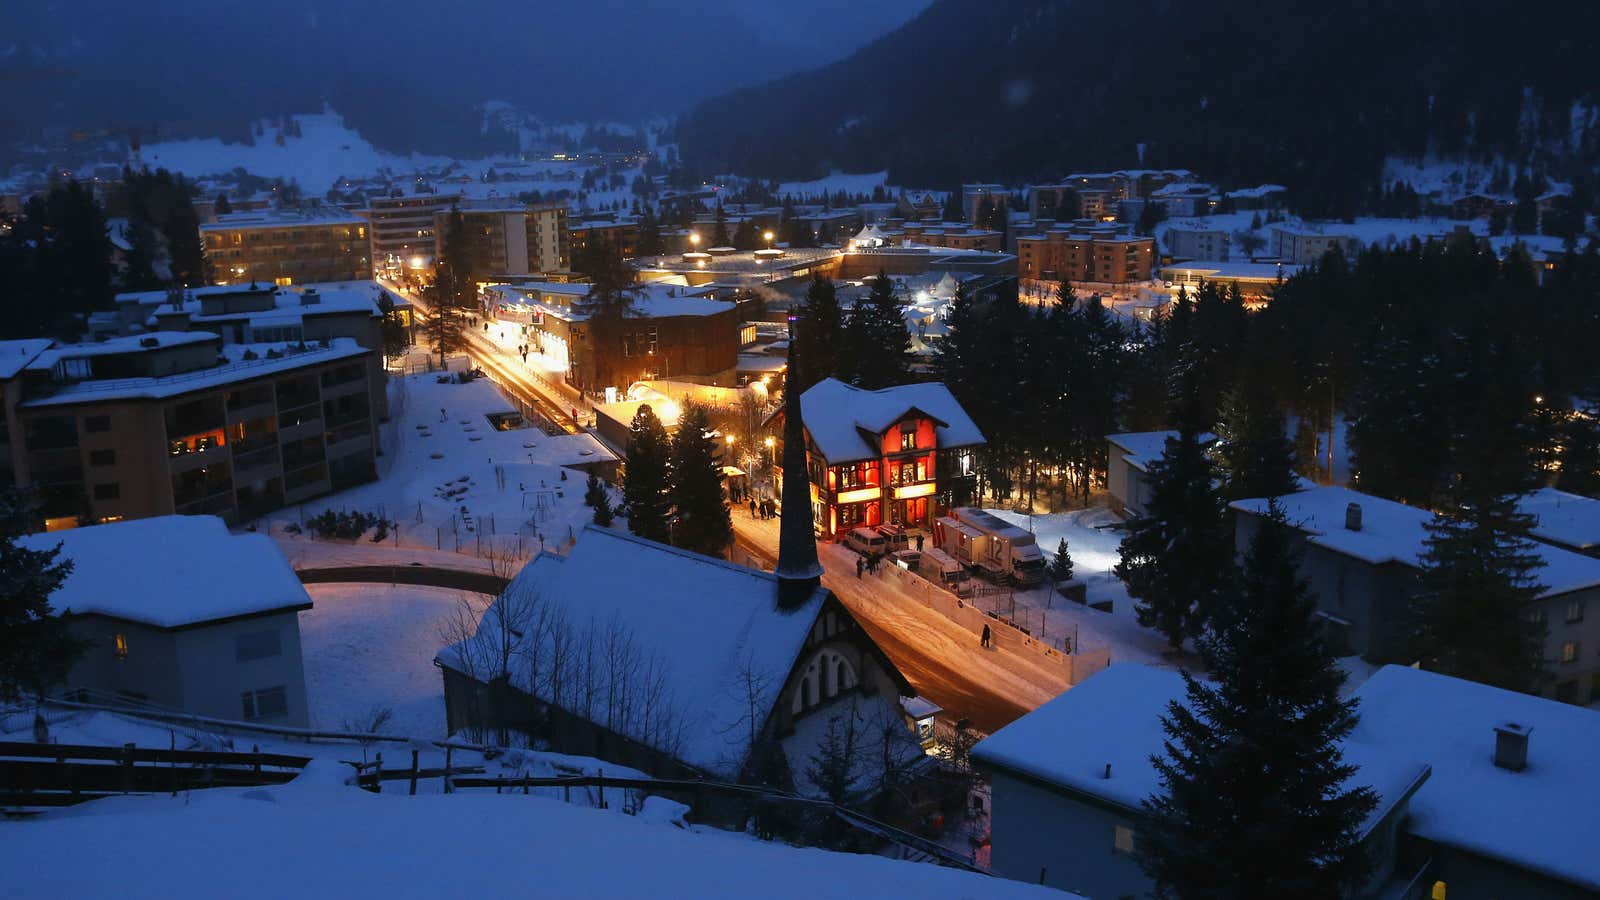 The context at Davos is quite pretty.